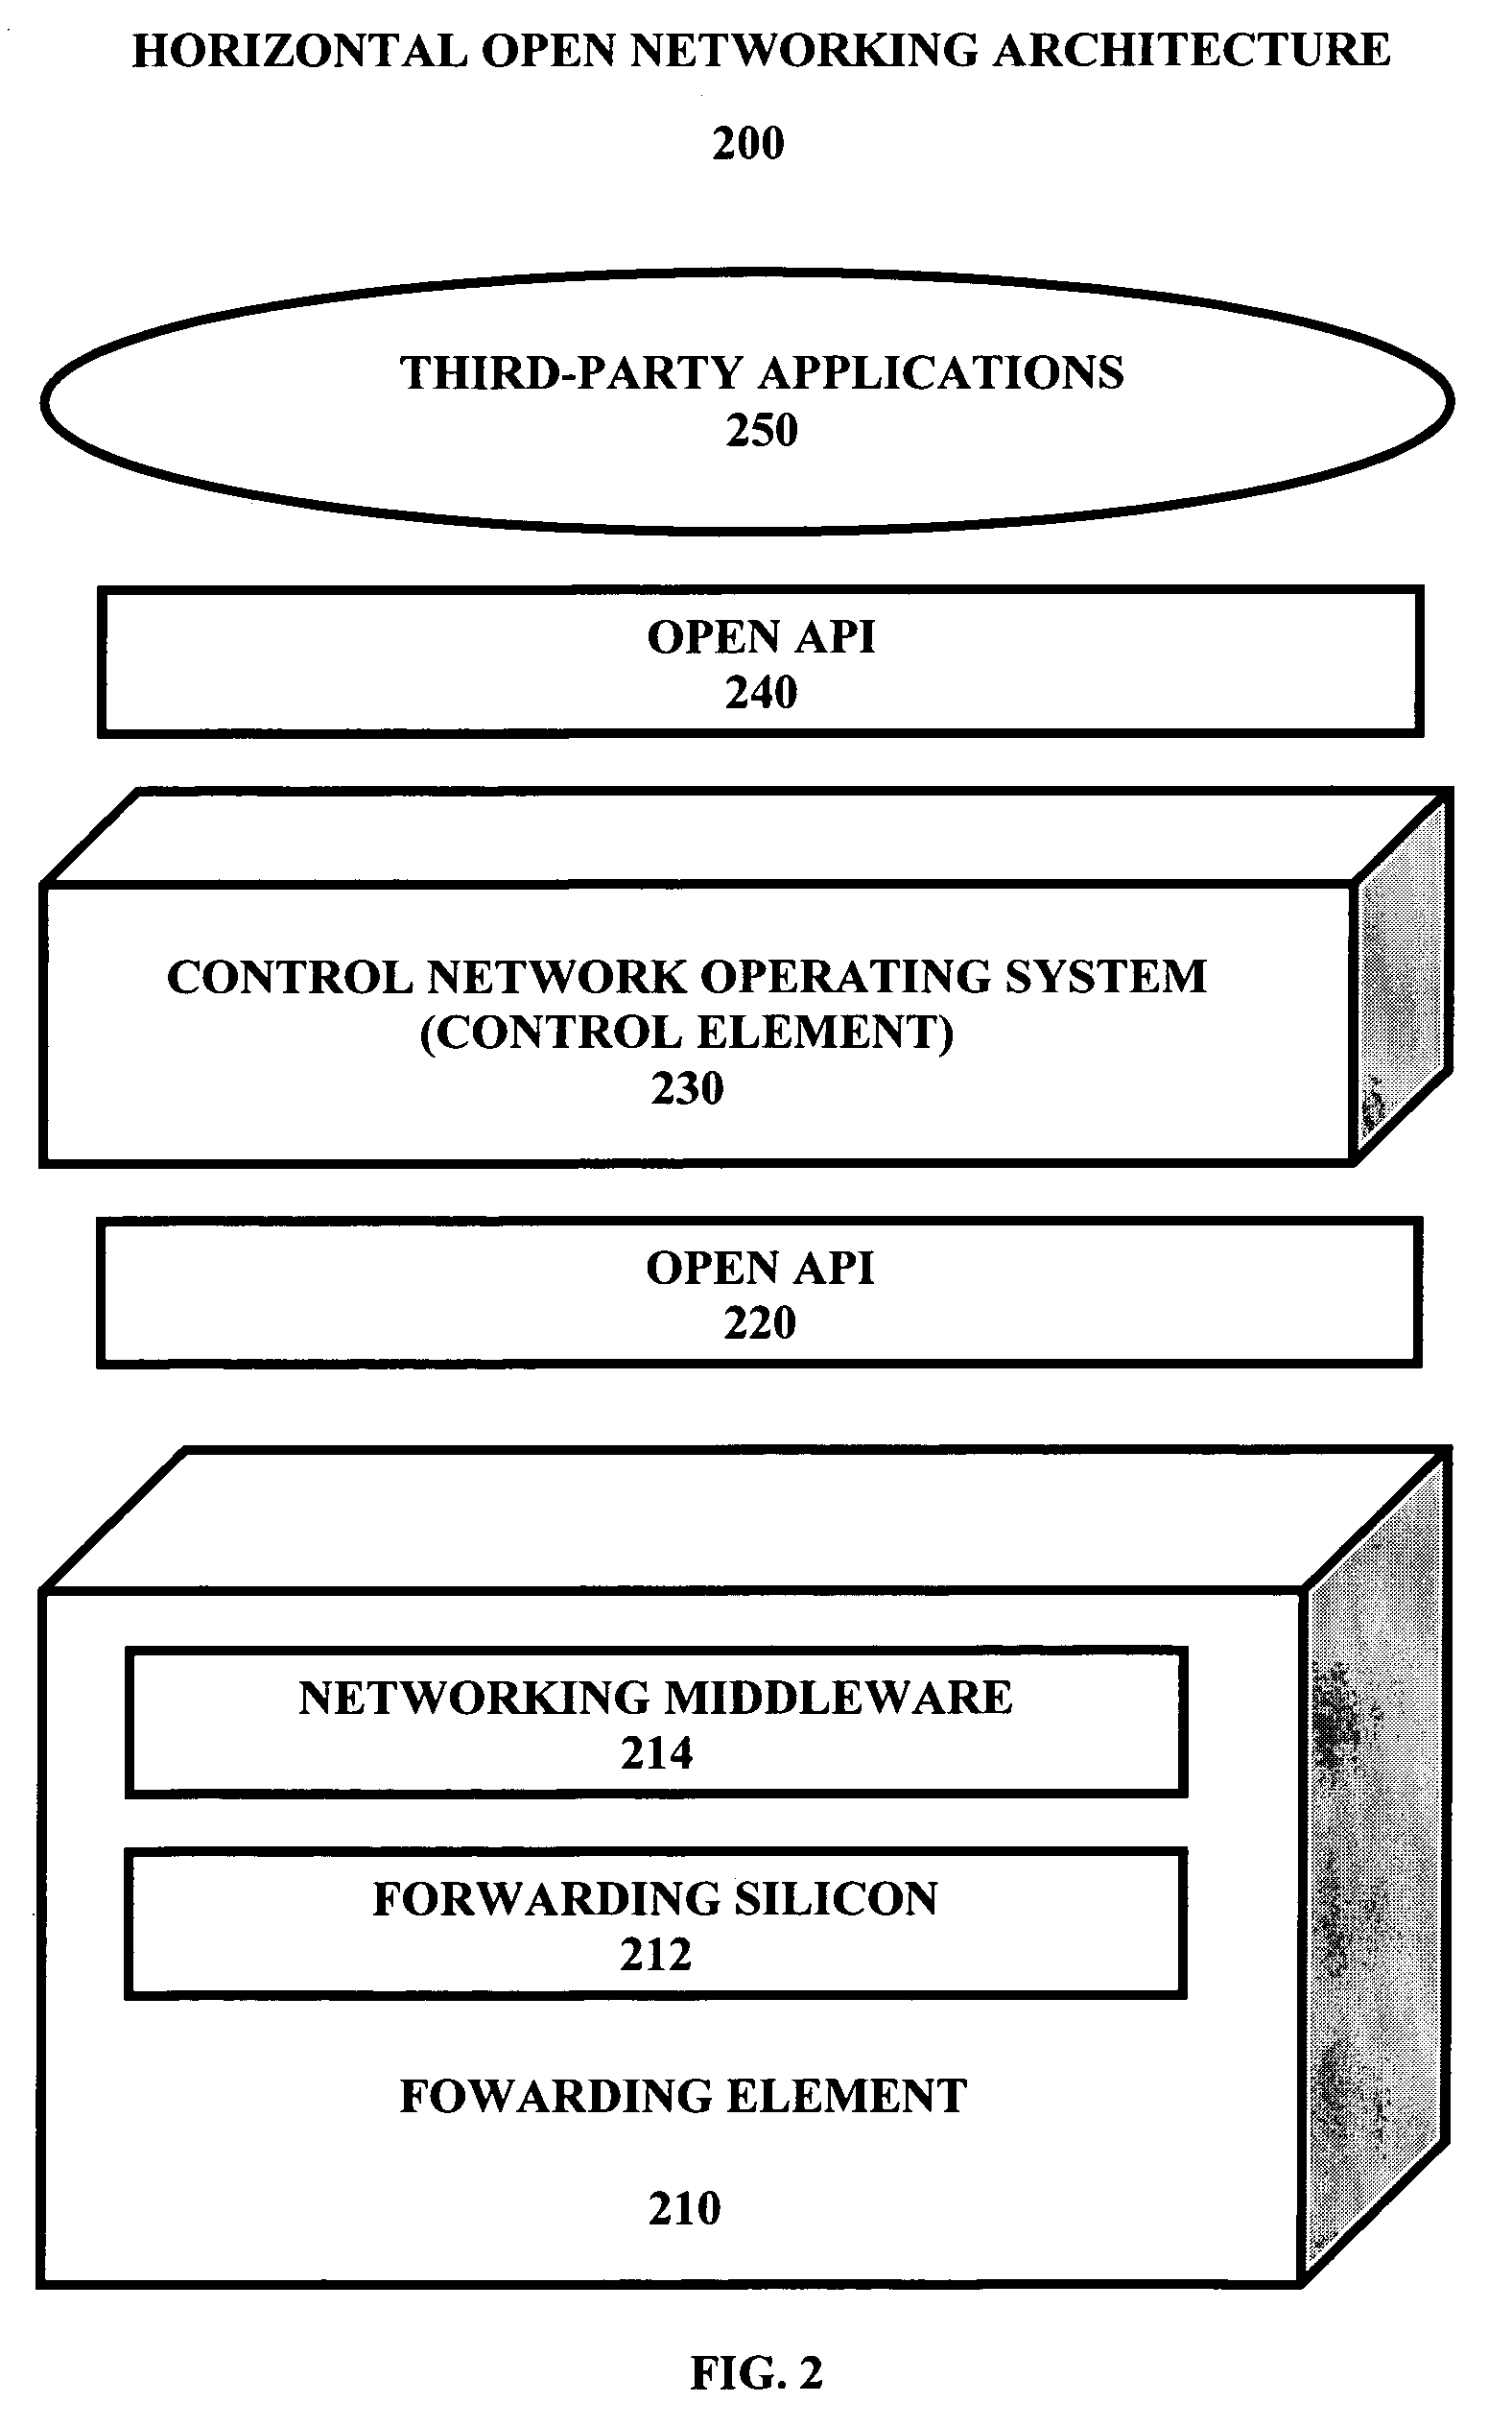 Method and apparatus for allowing proprietary forwarding elements to interoperate with standard control elements in an open architecture for network devices